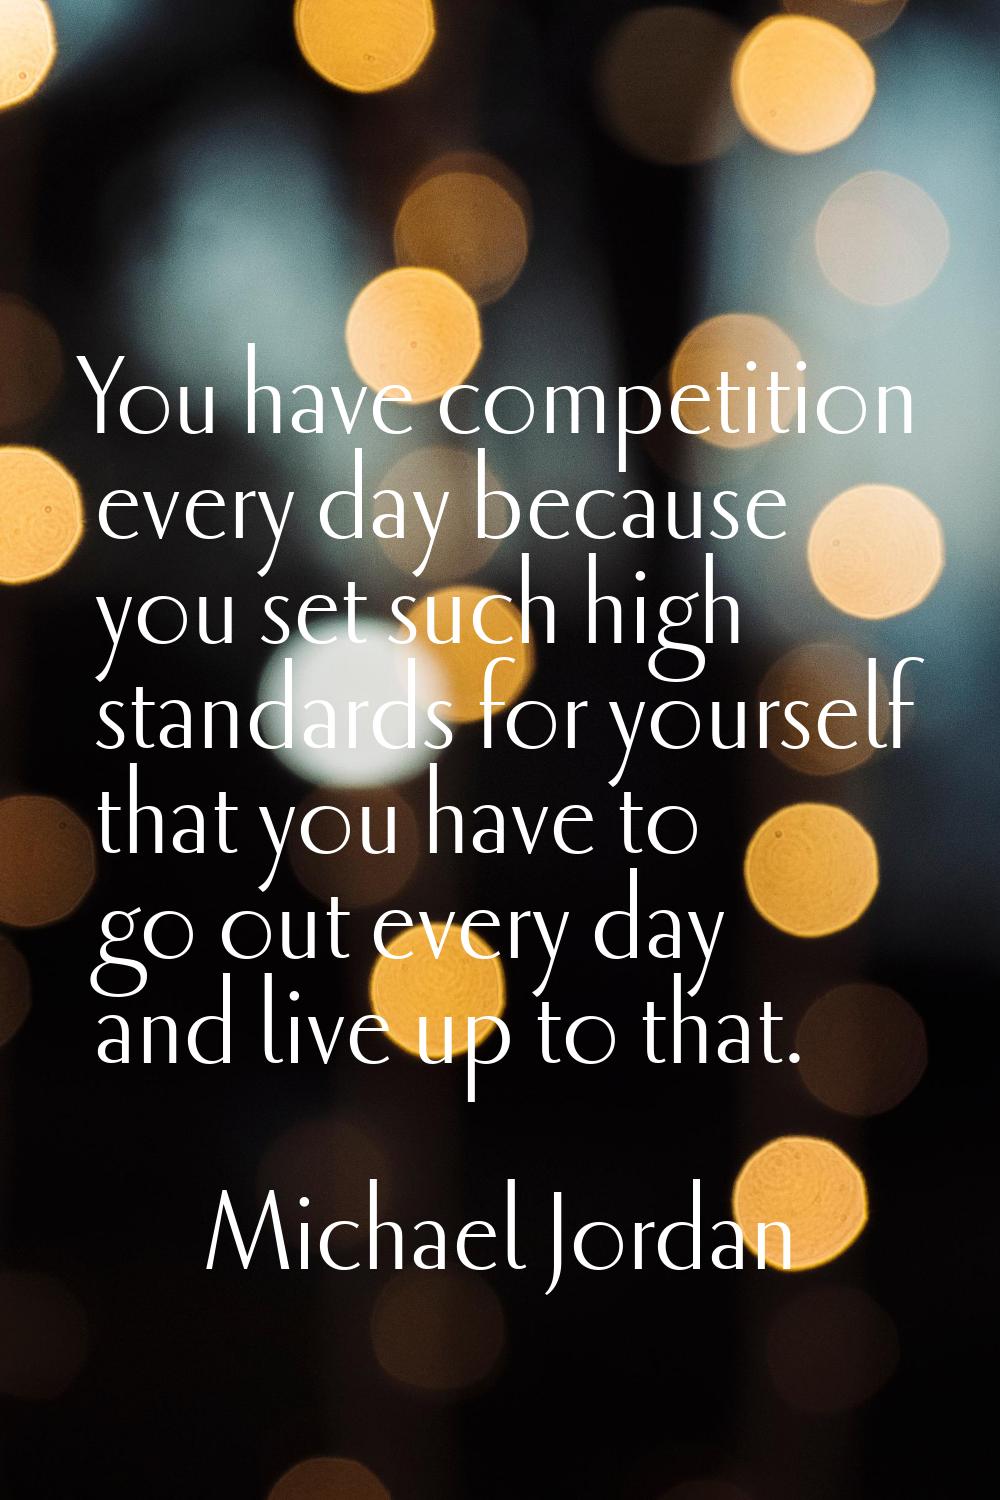 You have competition every day because you set such high standards for yourself that you have to go